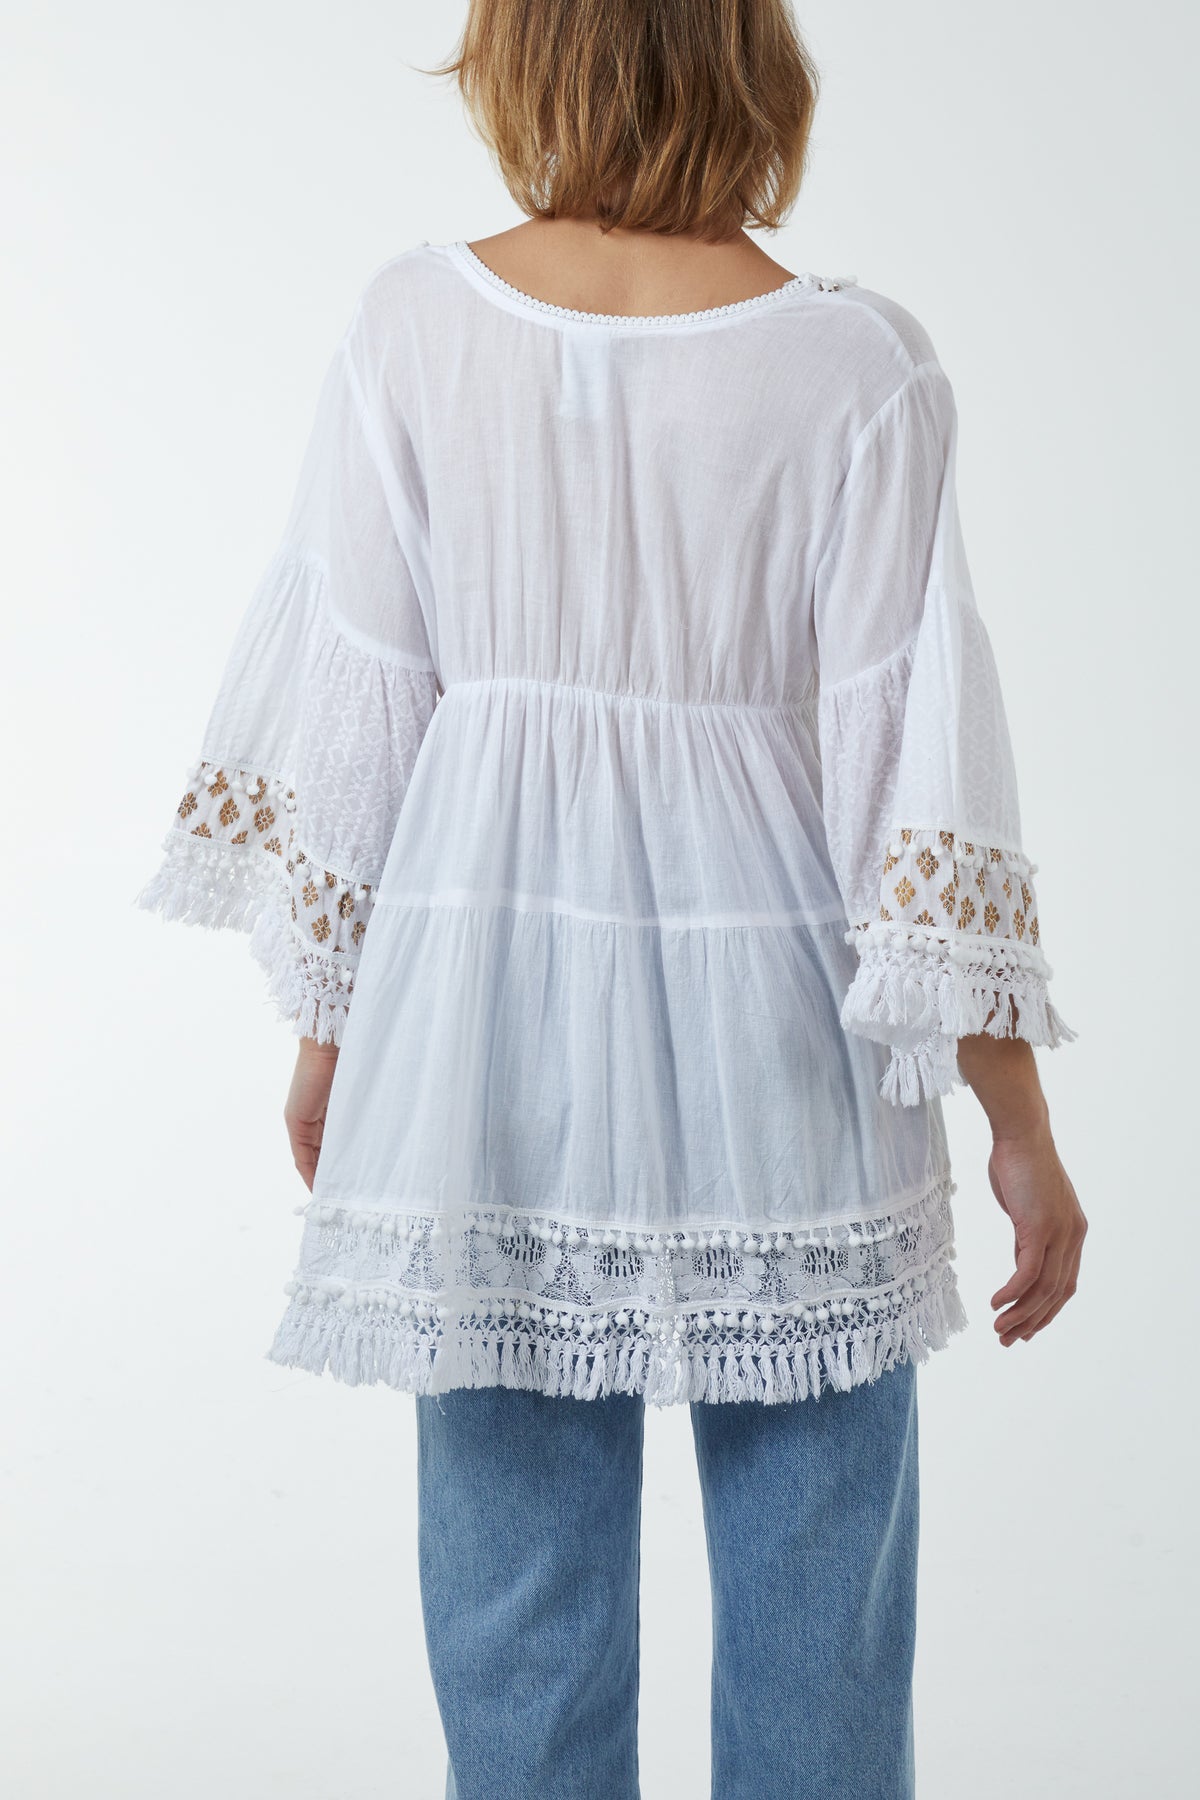 Gold Detailing Tassel Tiered Top